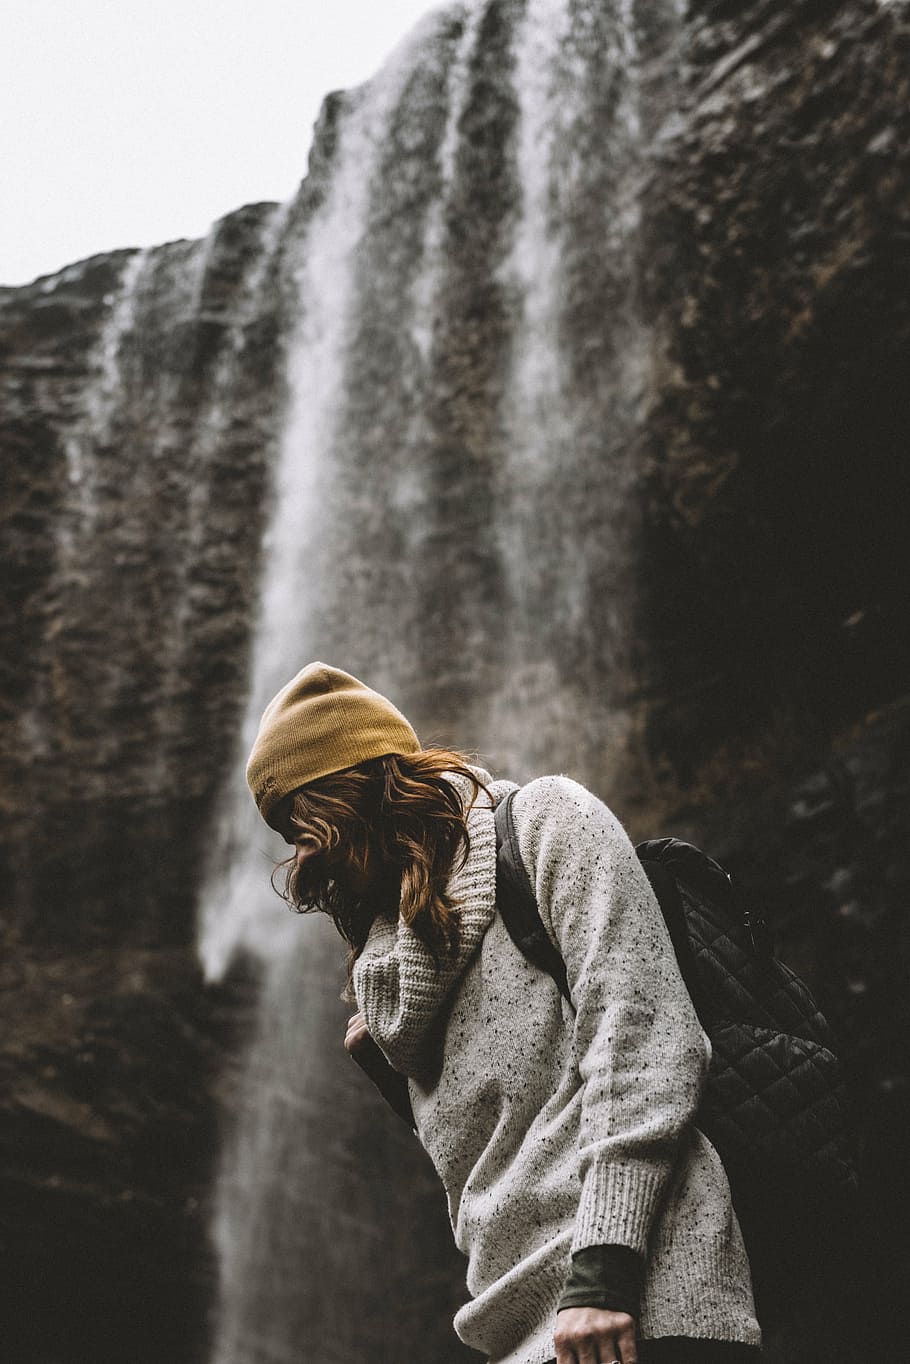 woman, standing, waterfalls, gray, sweater, front, daytime, people, girl, alone